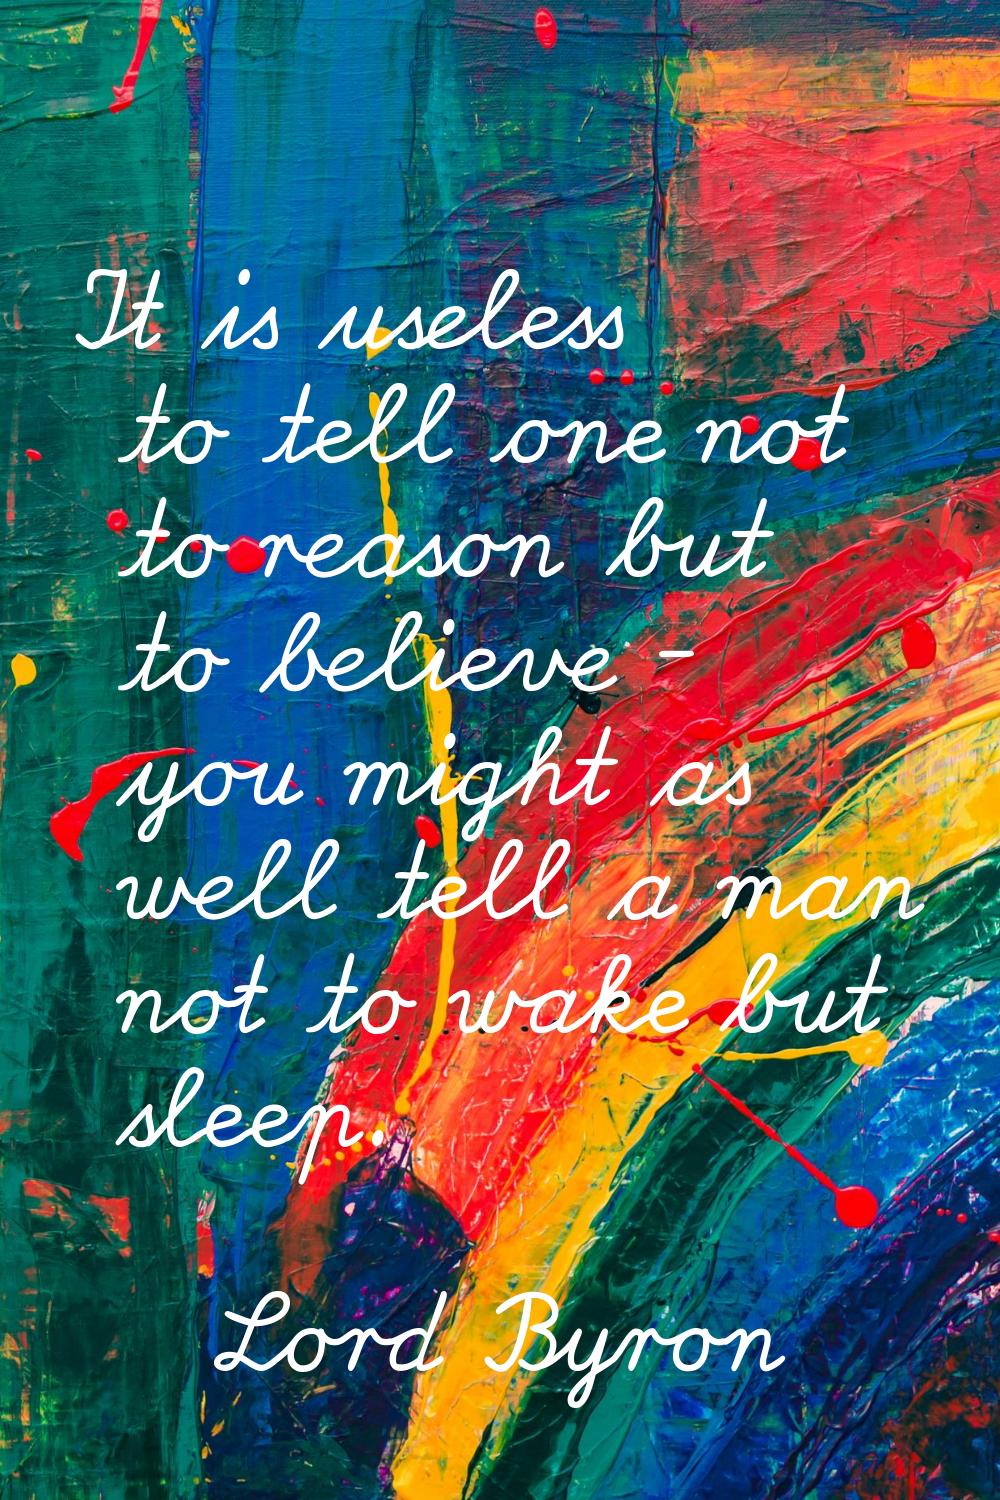 It is useless to tell one not to reason but to believe - you might as well tell a man not to wake b